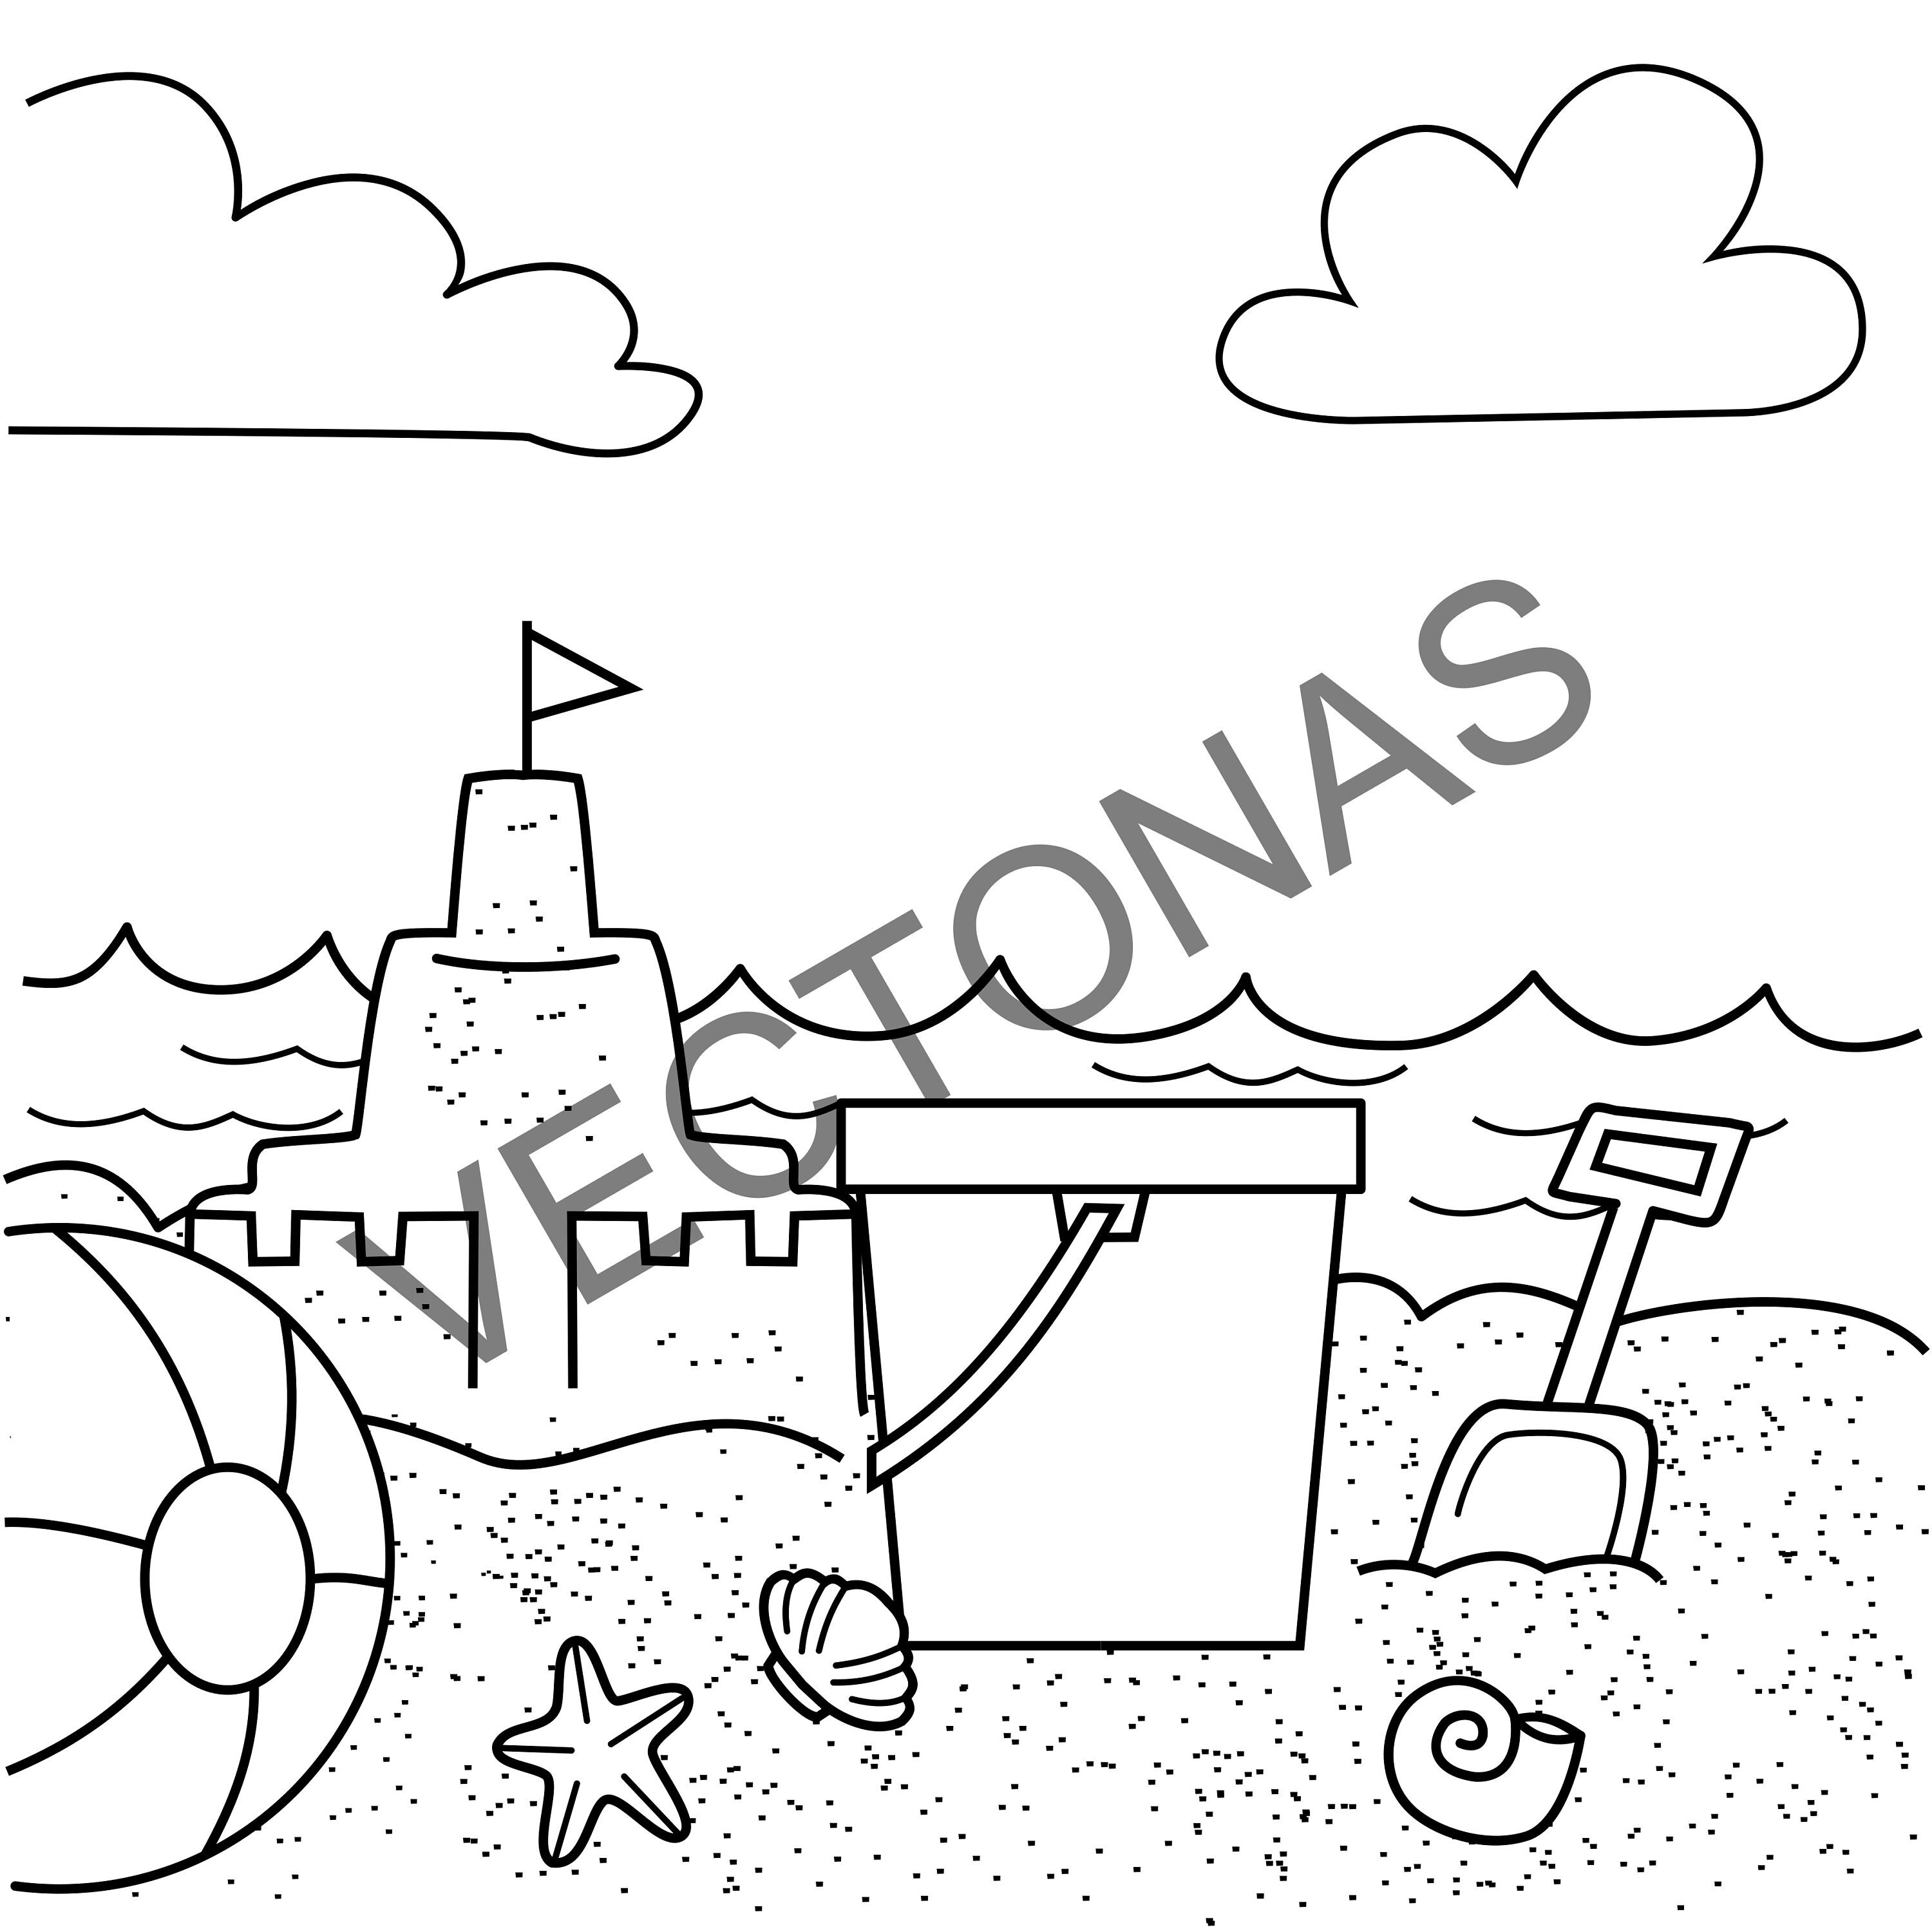 Printable Child Coloring Page beach. Instant Download black | Etsy